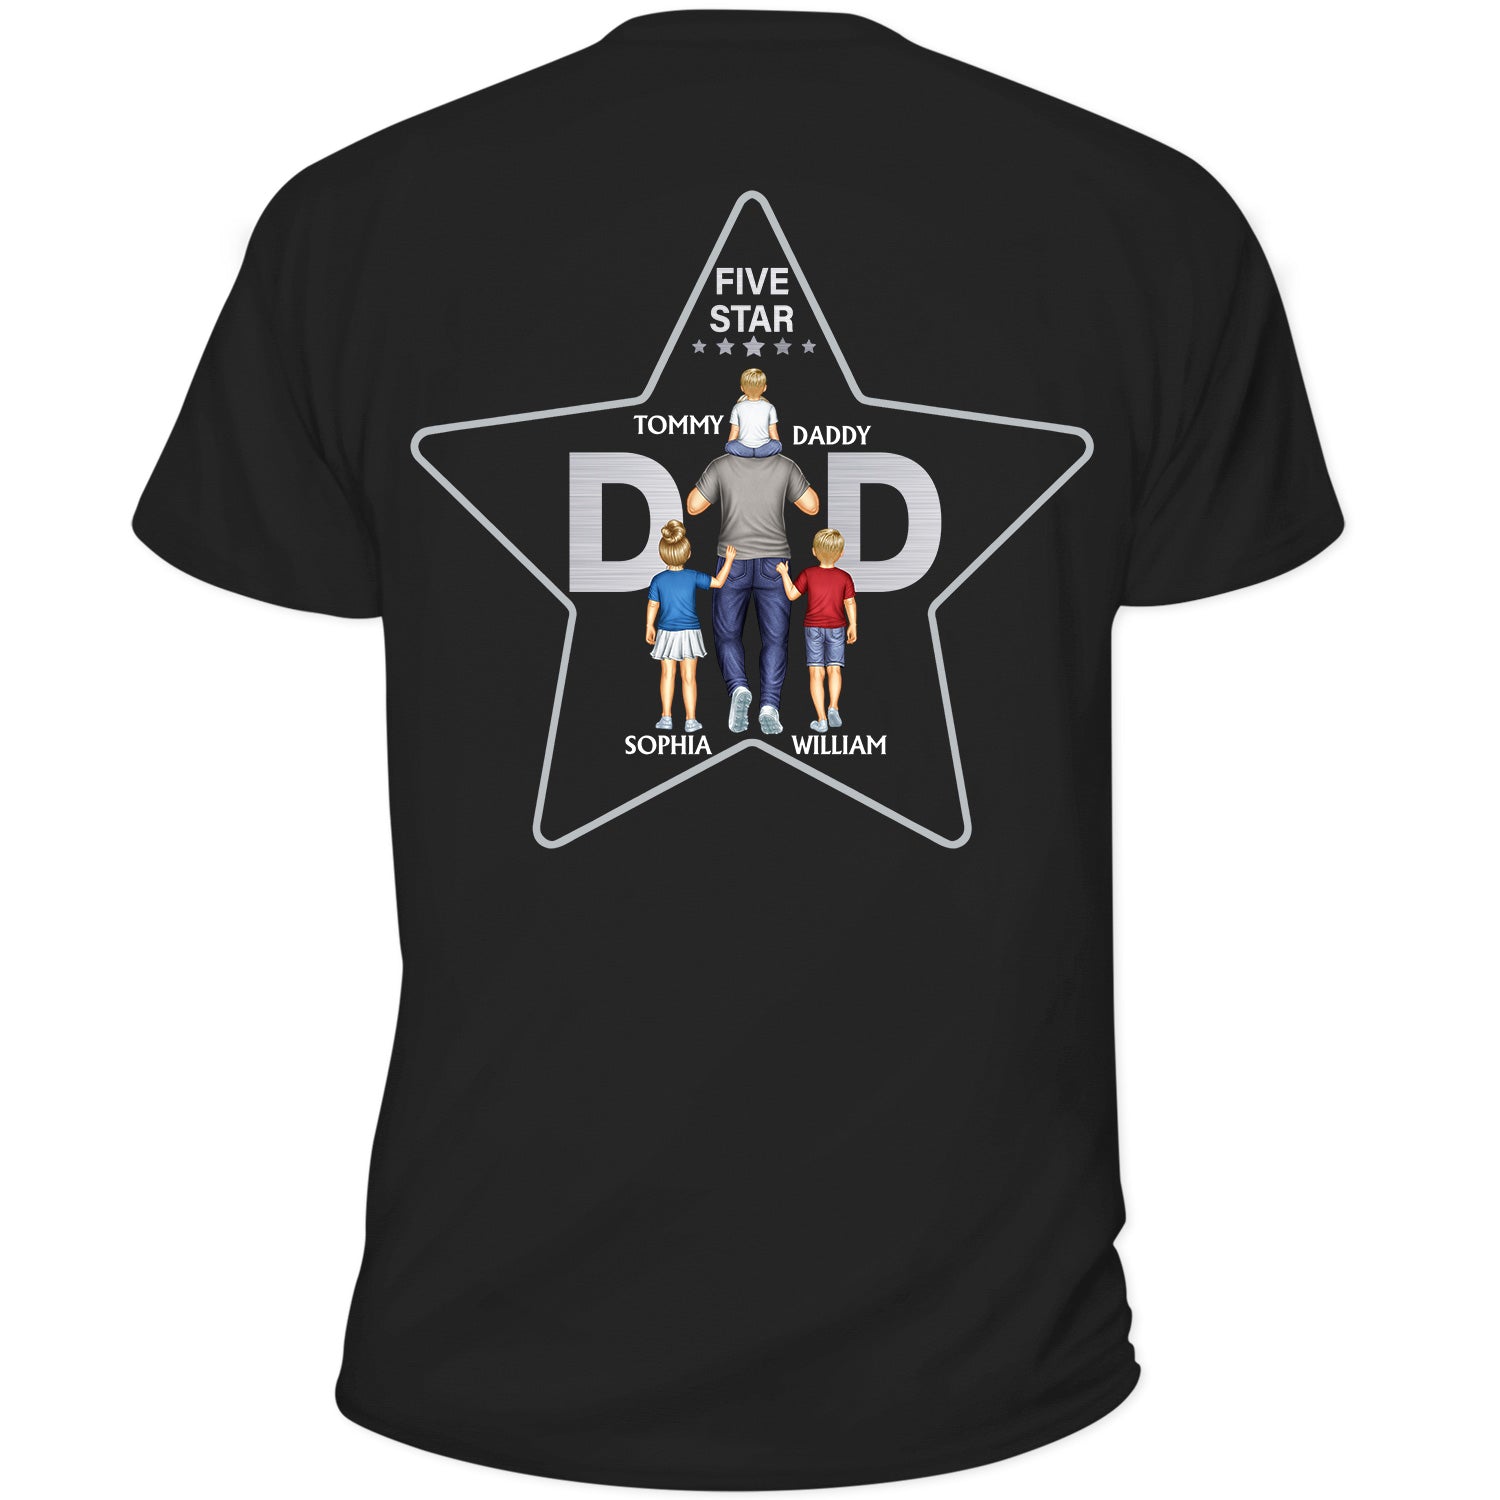 Five Star Dad - Birthday Gift For Father, Family - Personalized Custom T Shirt